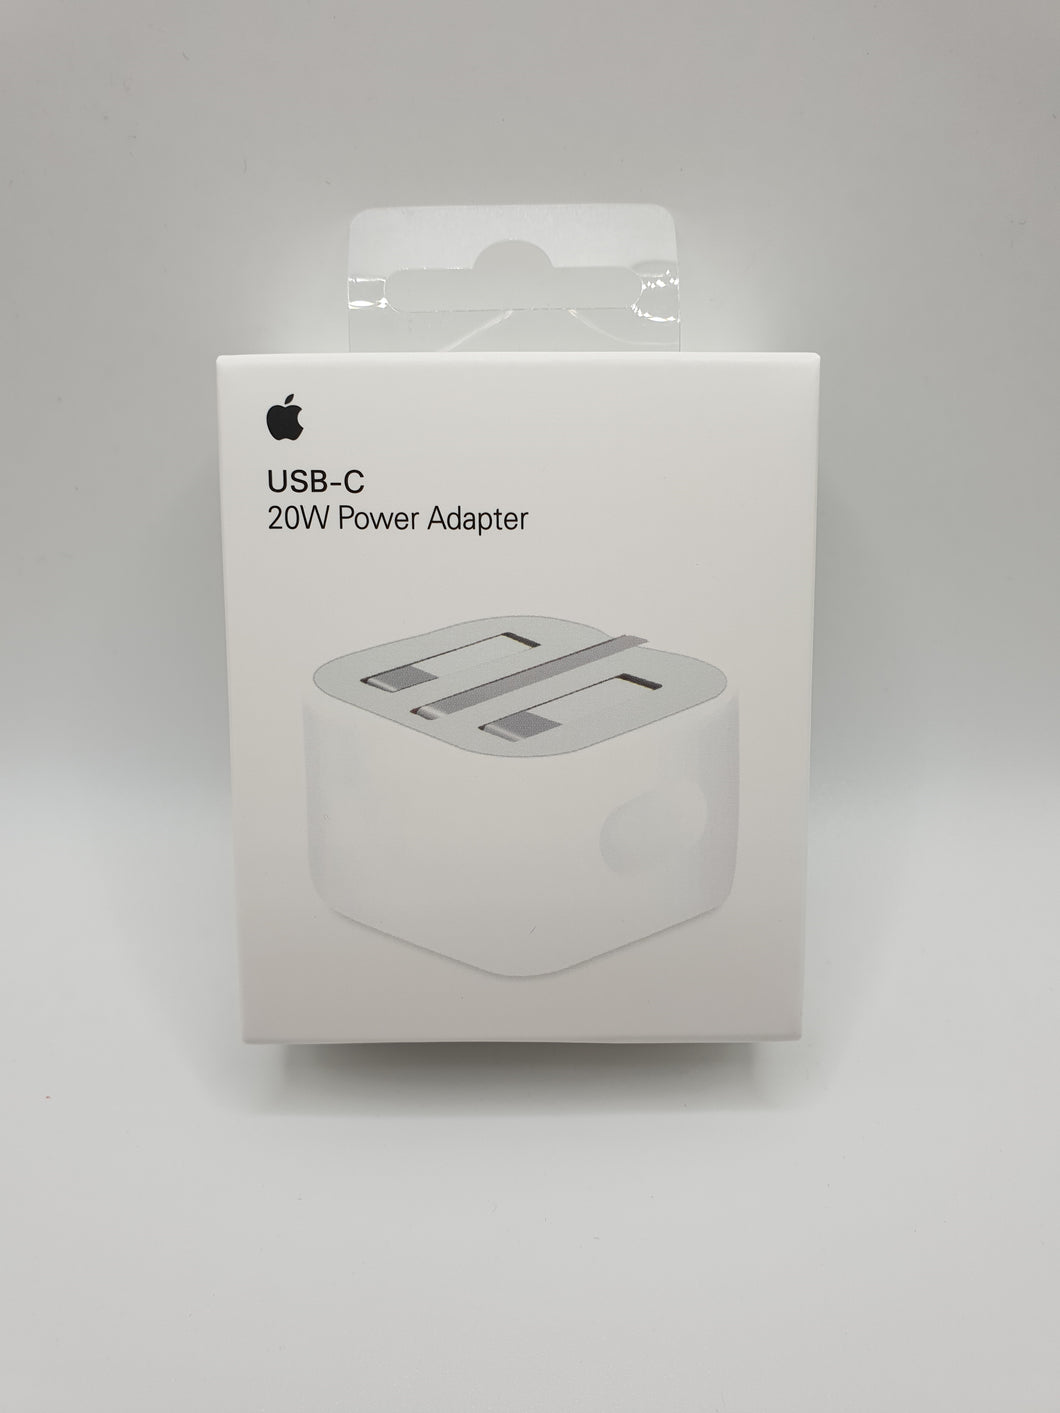 Apple USB-C Plug Mains Charger Power 20W Adapter Genuine Official Product